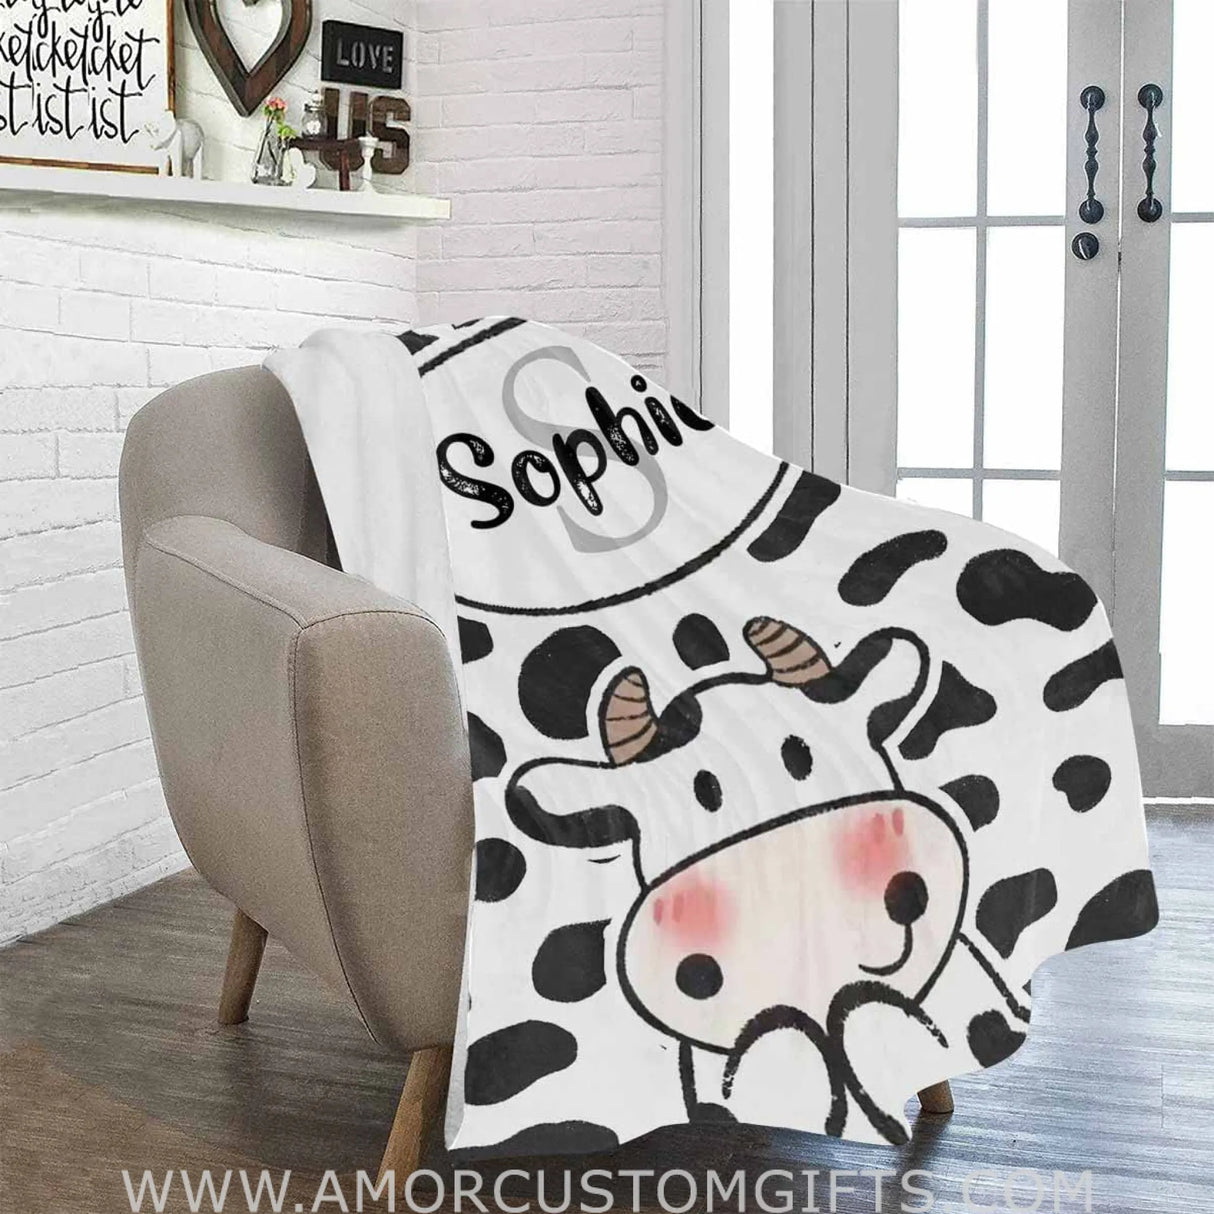 Blankets Personalized Baby Blankets with Cow Design for Kids - Throw Blanket with Cute Animal - Swadding Blanket for Toddler